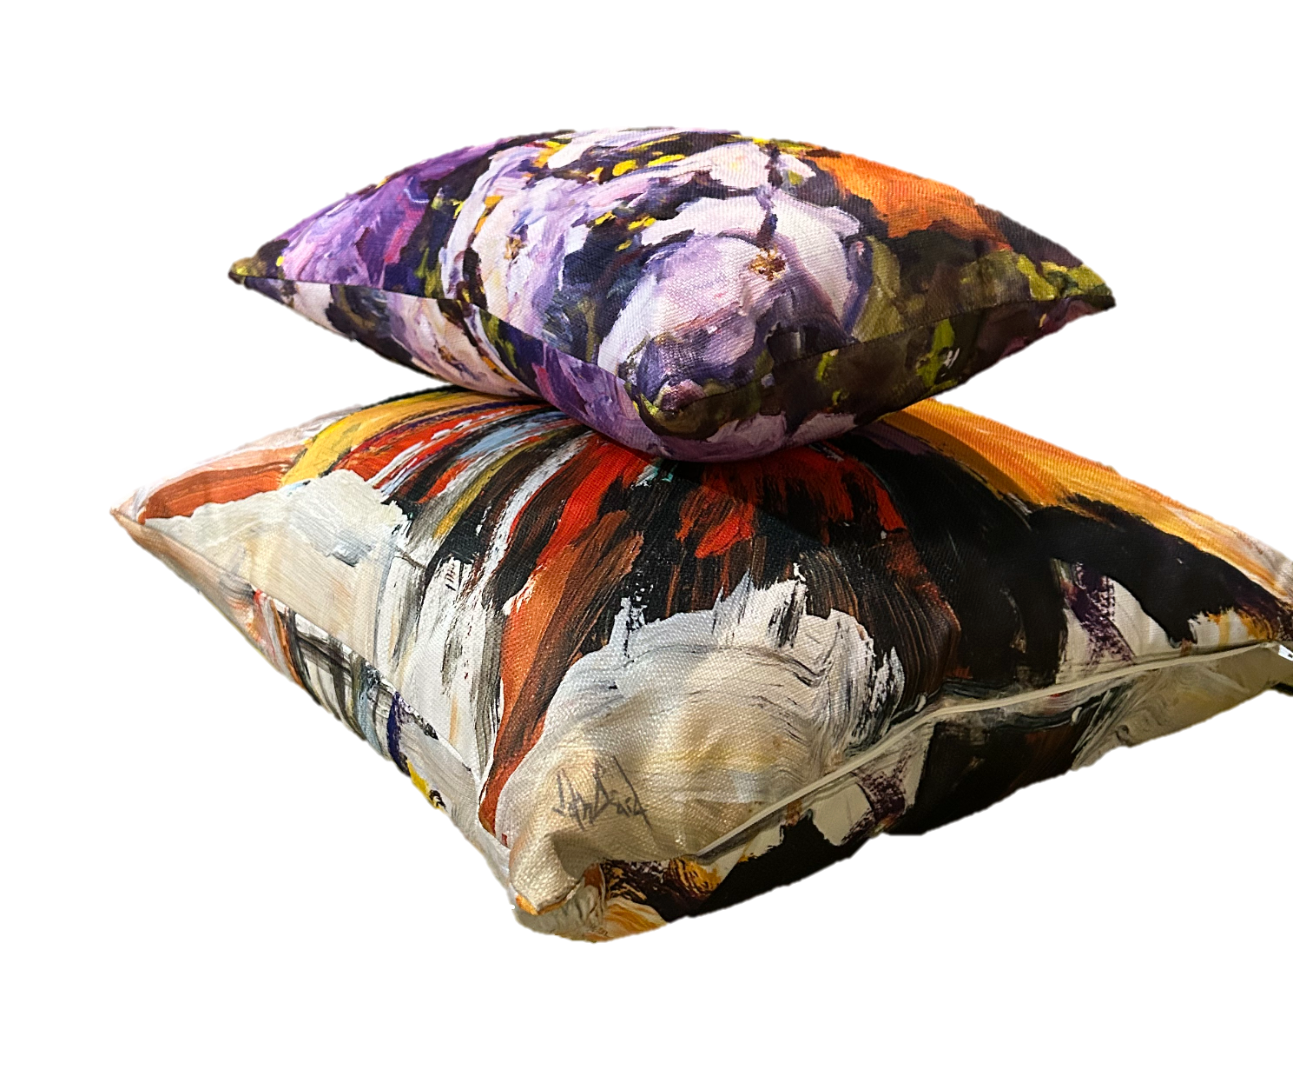 Lily Pond Pillow